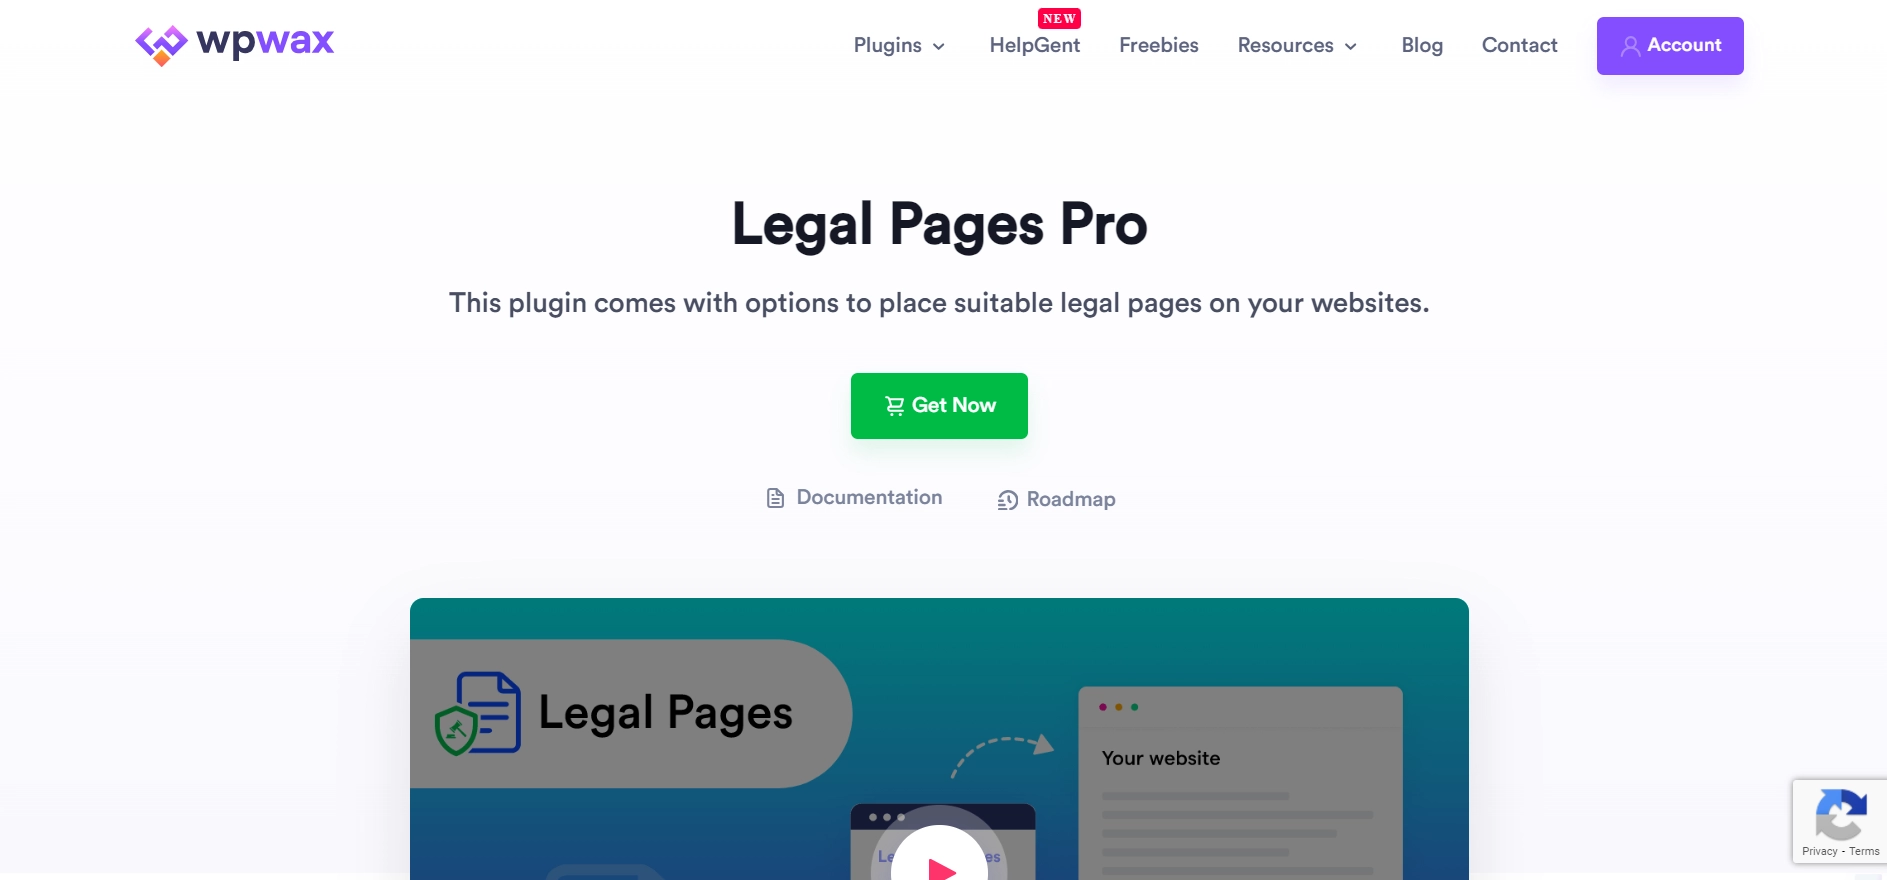 Legal Pages